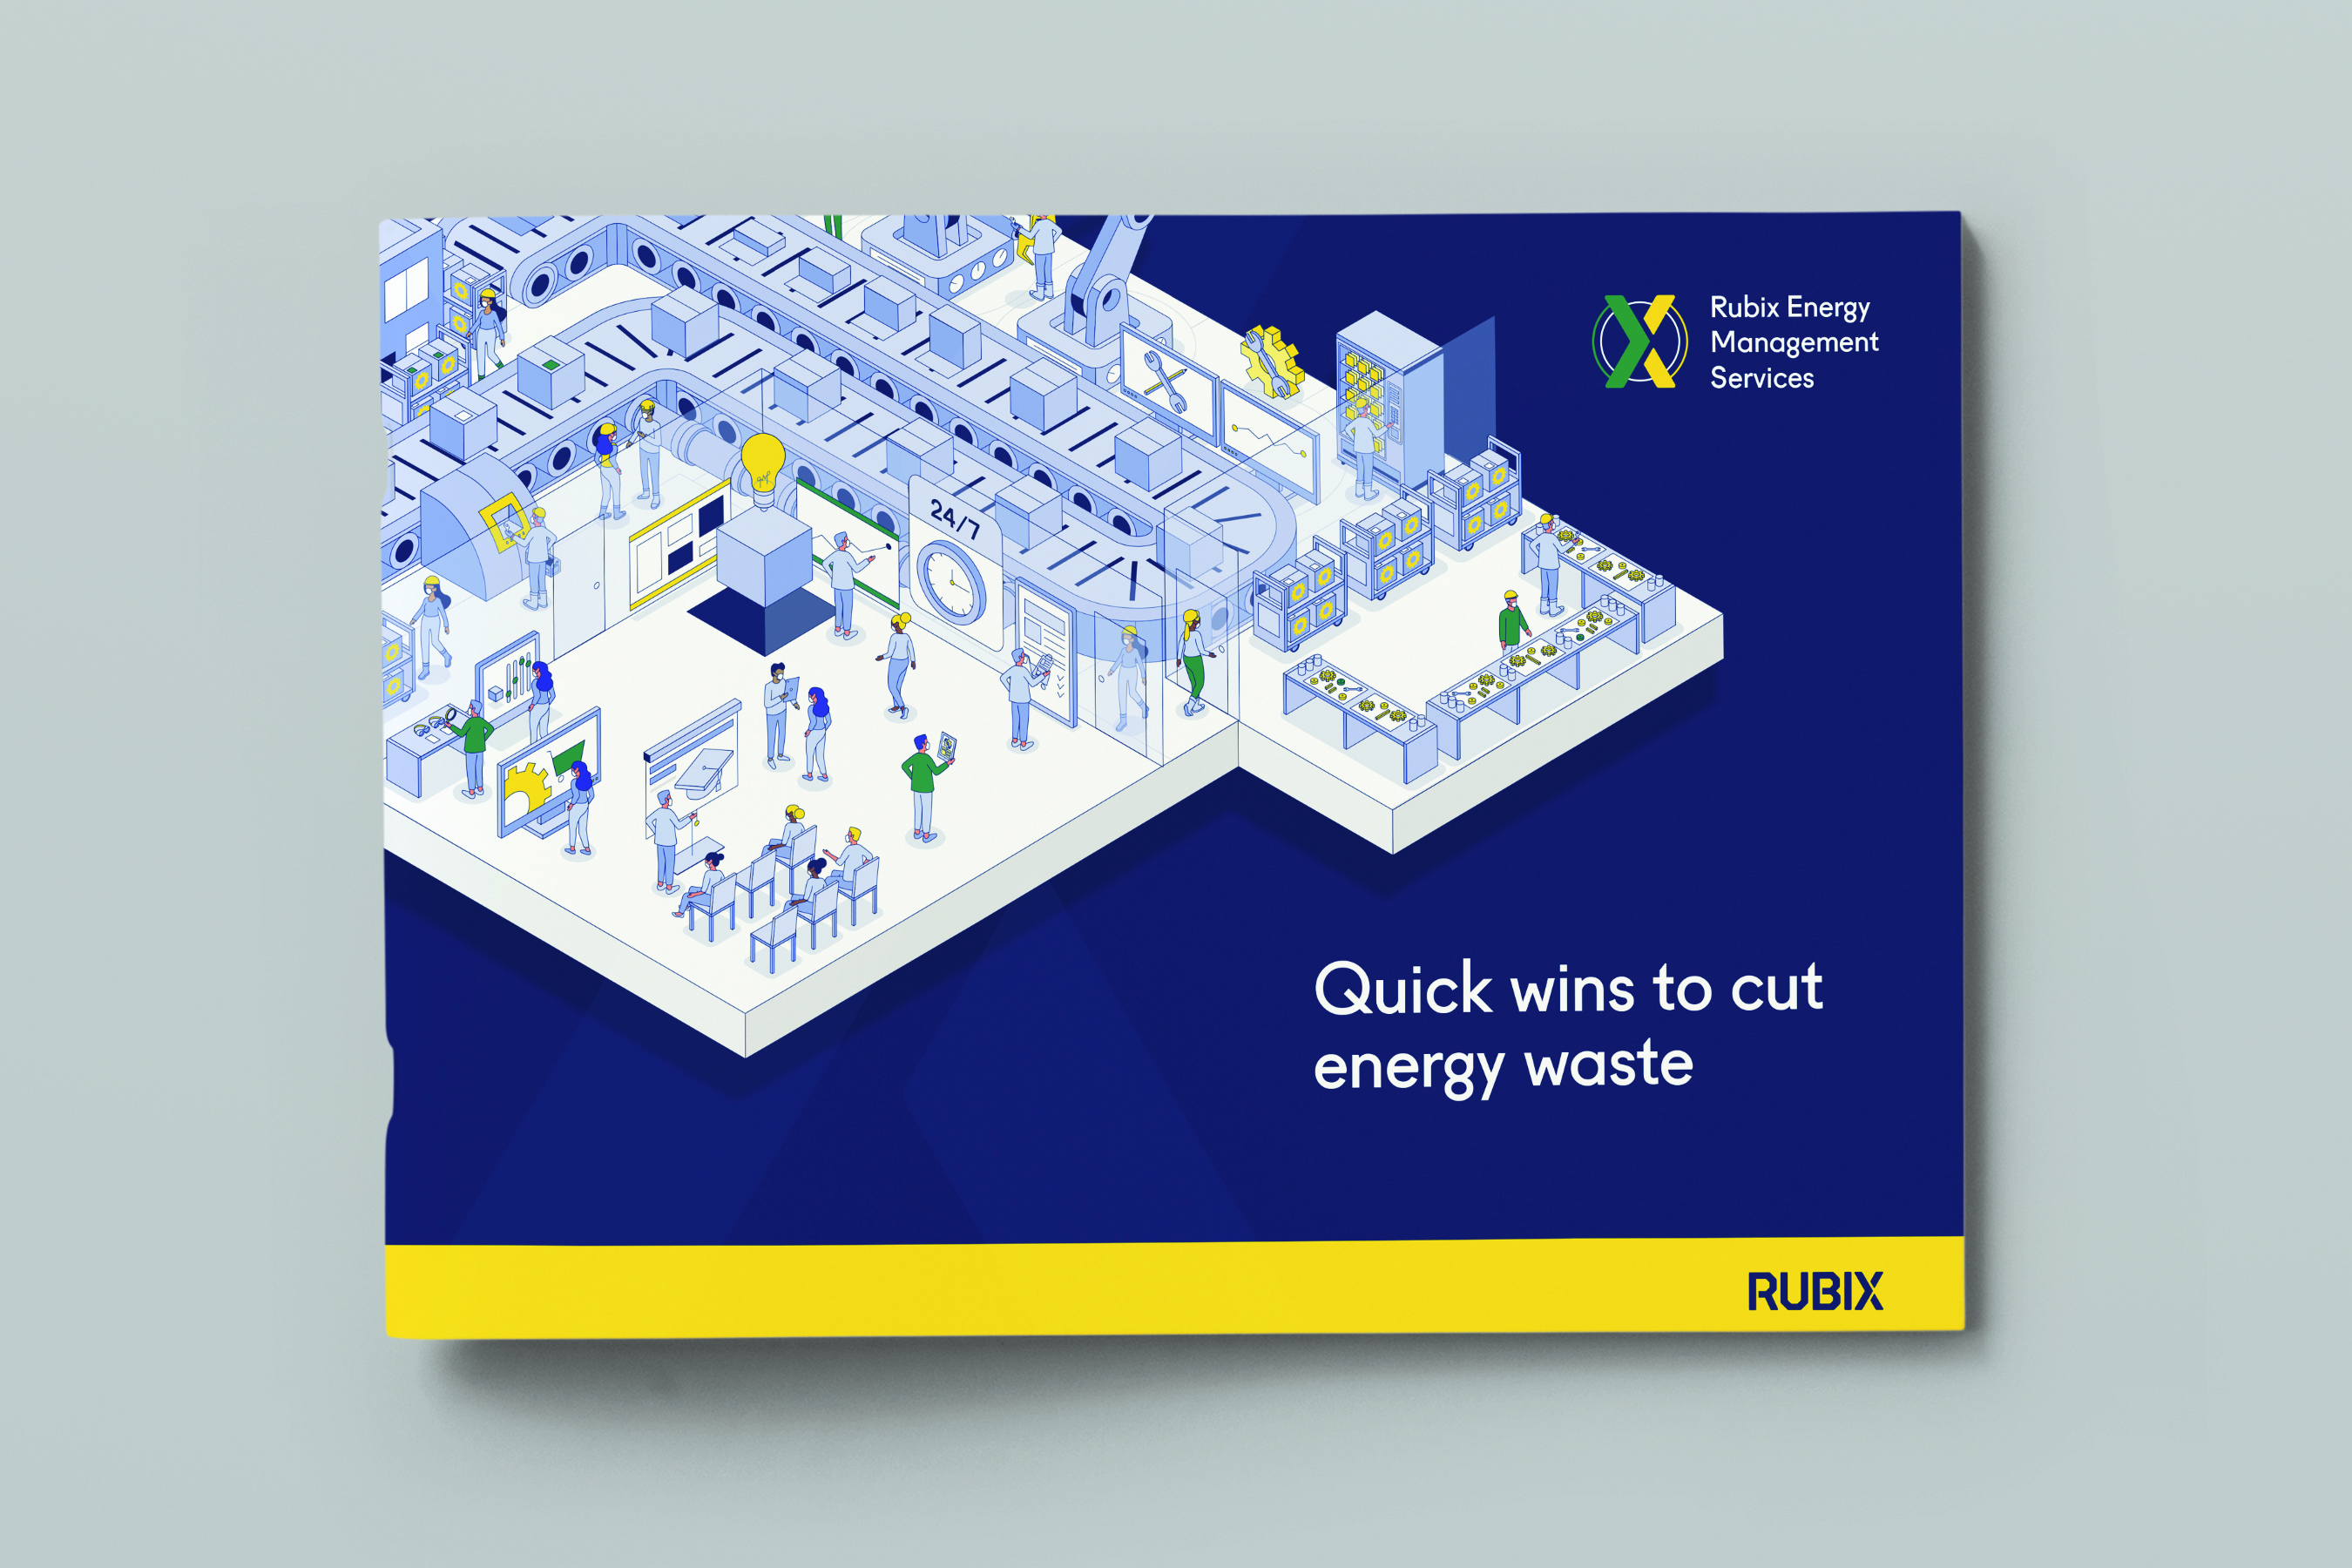 Quick wins: Rubix releases report identifying opportunities to double the efficiency of motor-driven systems 